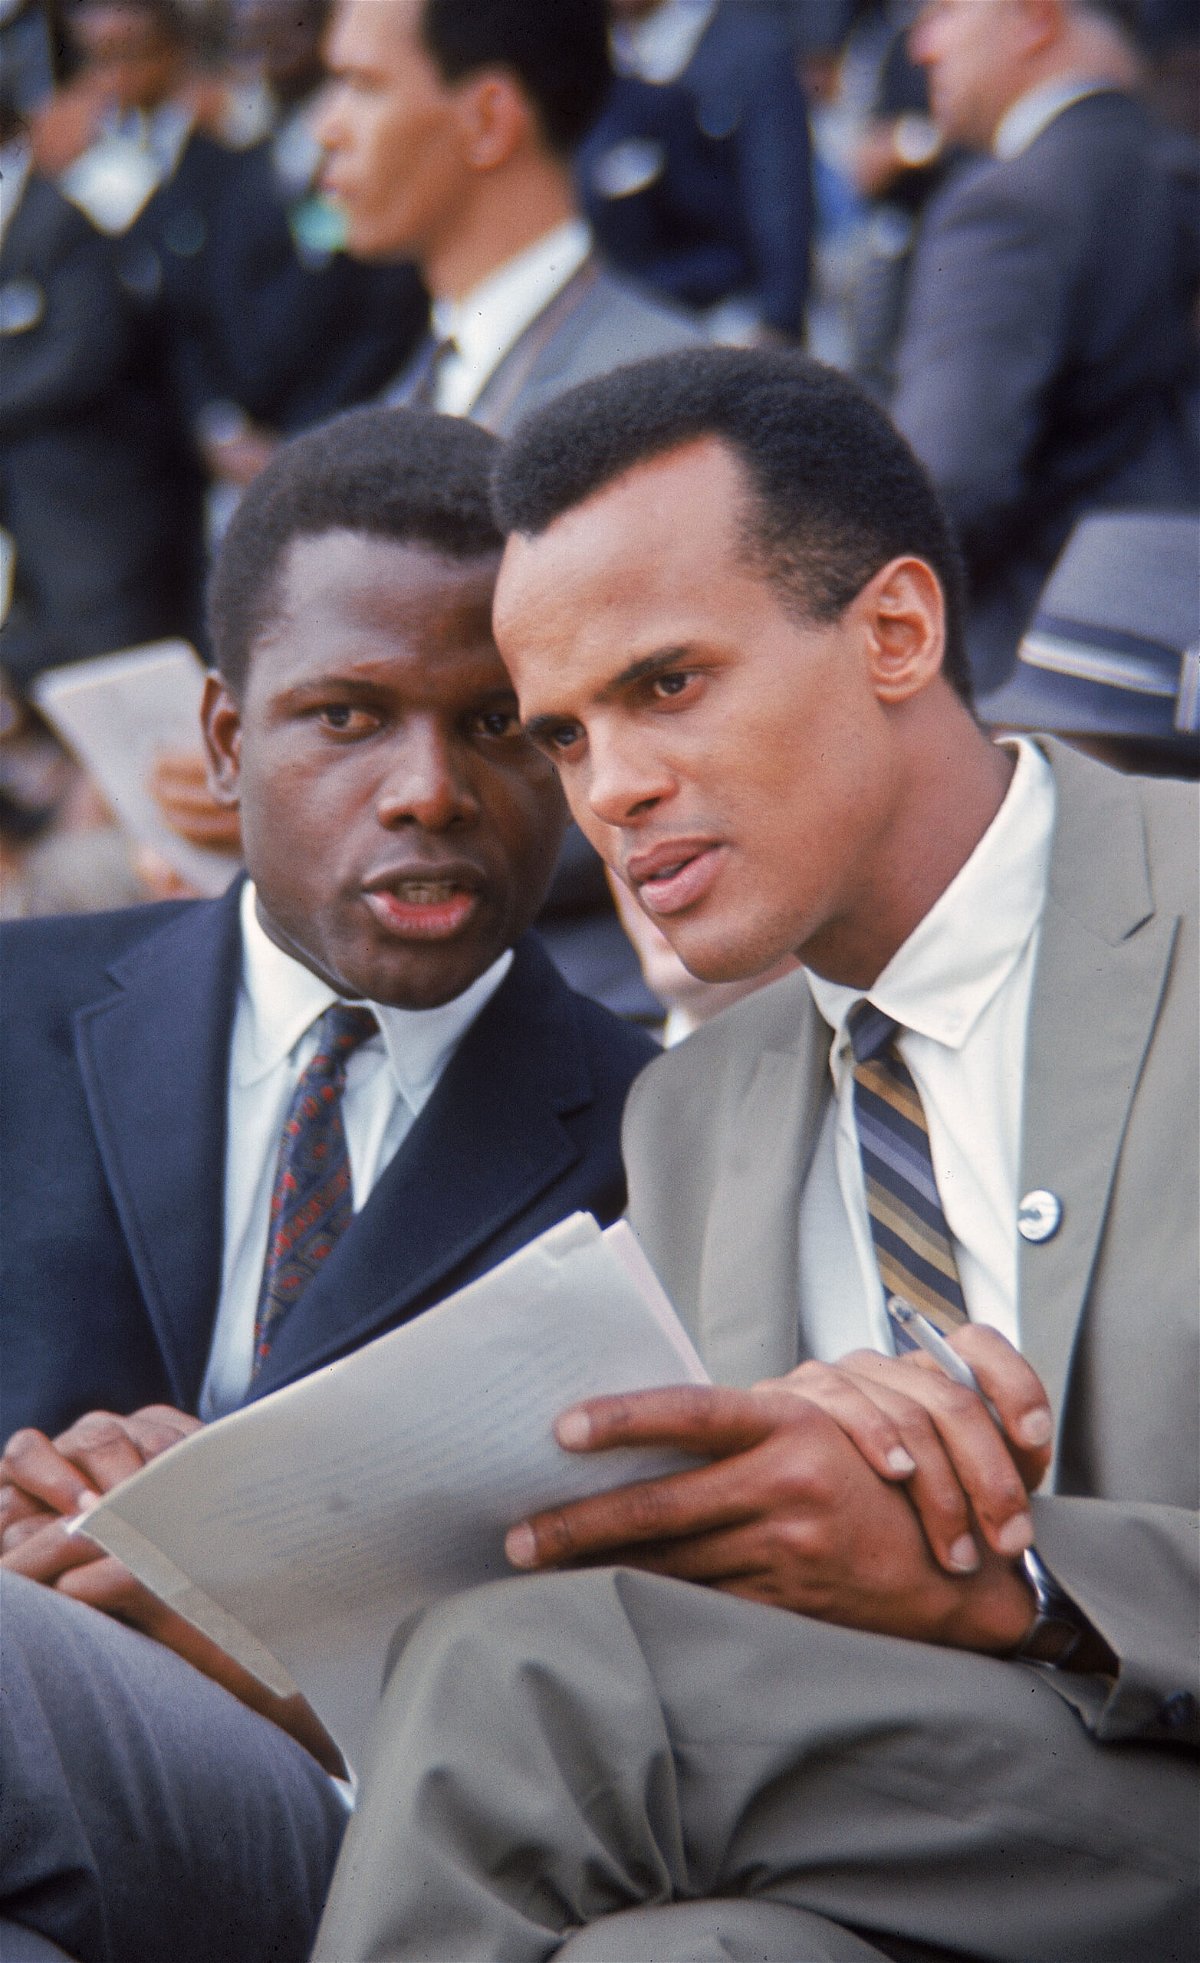 <i>Francis Miller/The LIFE Picture Collection/Shutterstock</i><br/>Actor Sidney Poitier and singer Harry Belafonte chat during the March on Washington for Jobs and Freedom in Washington